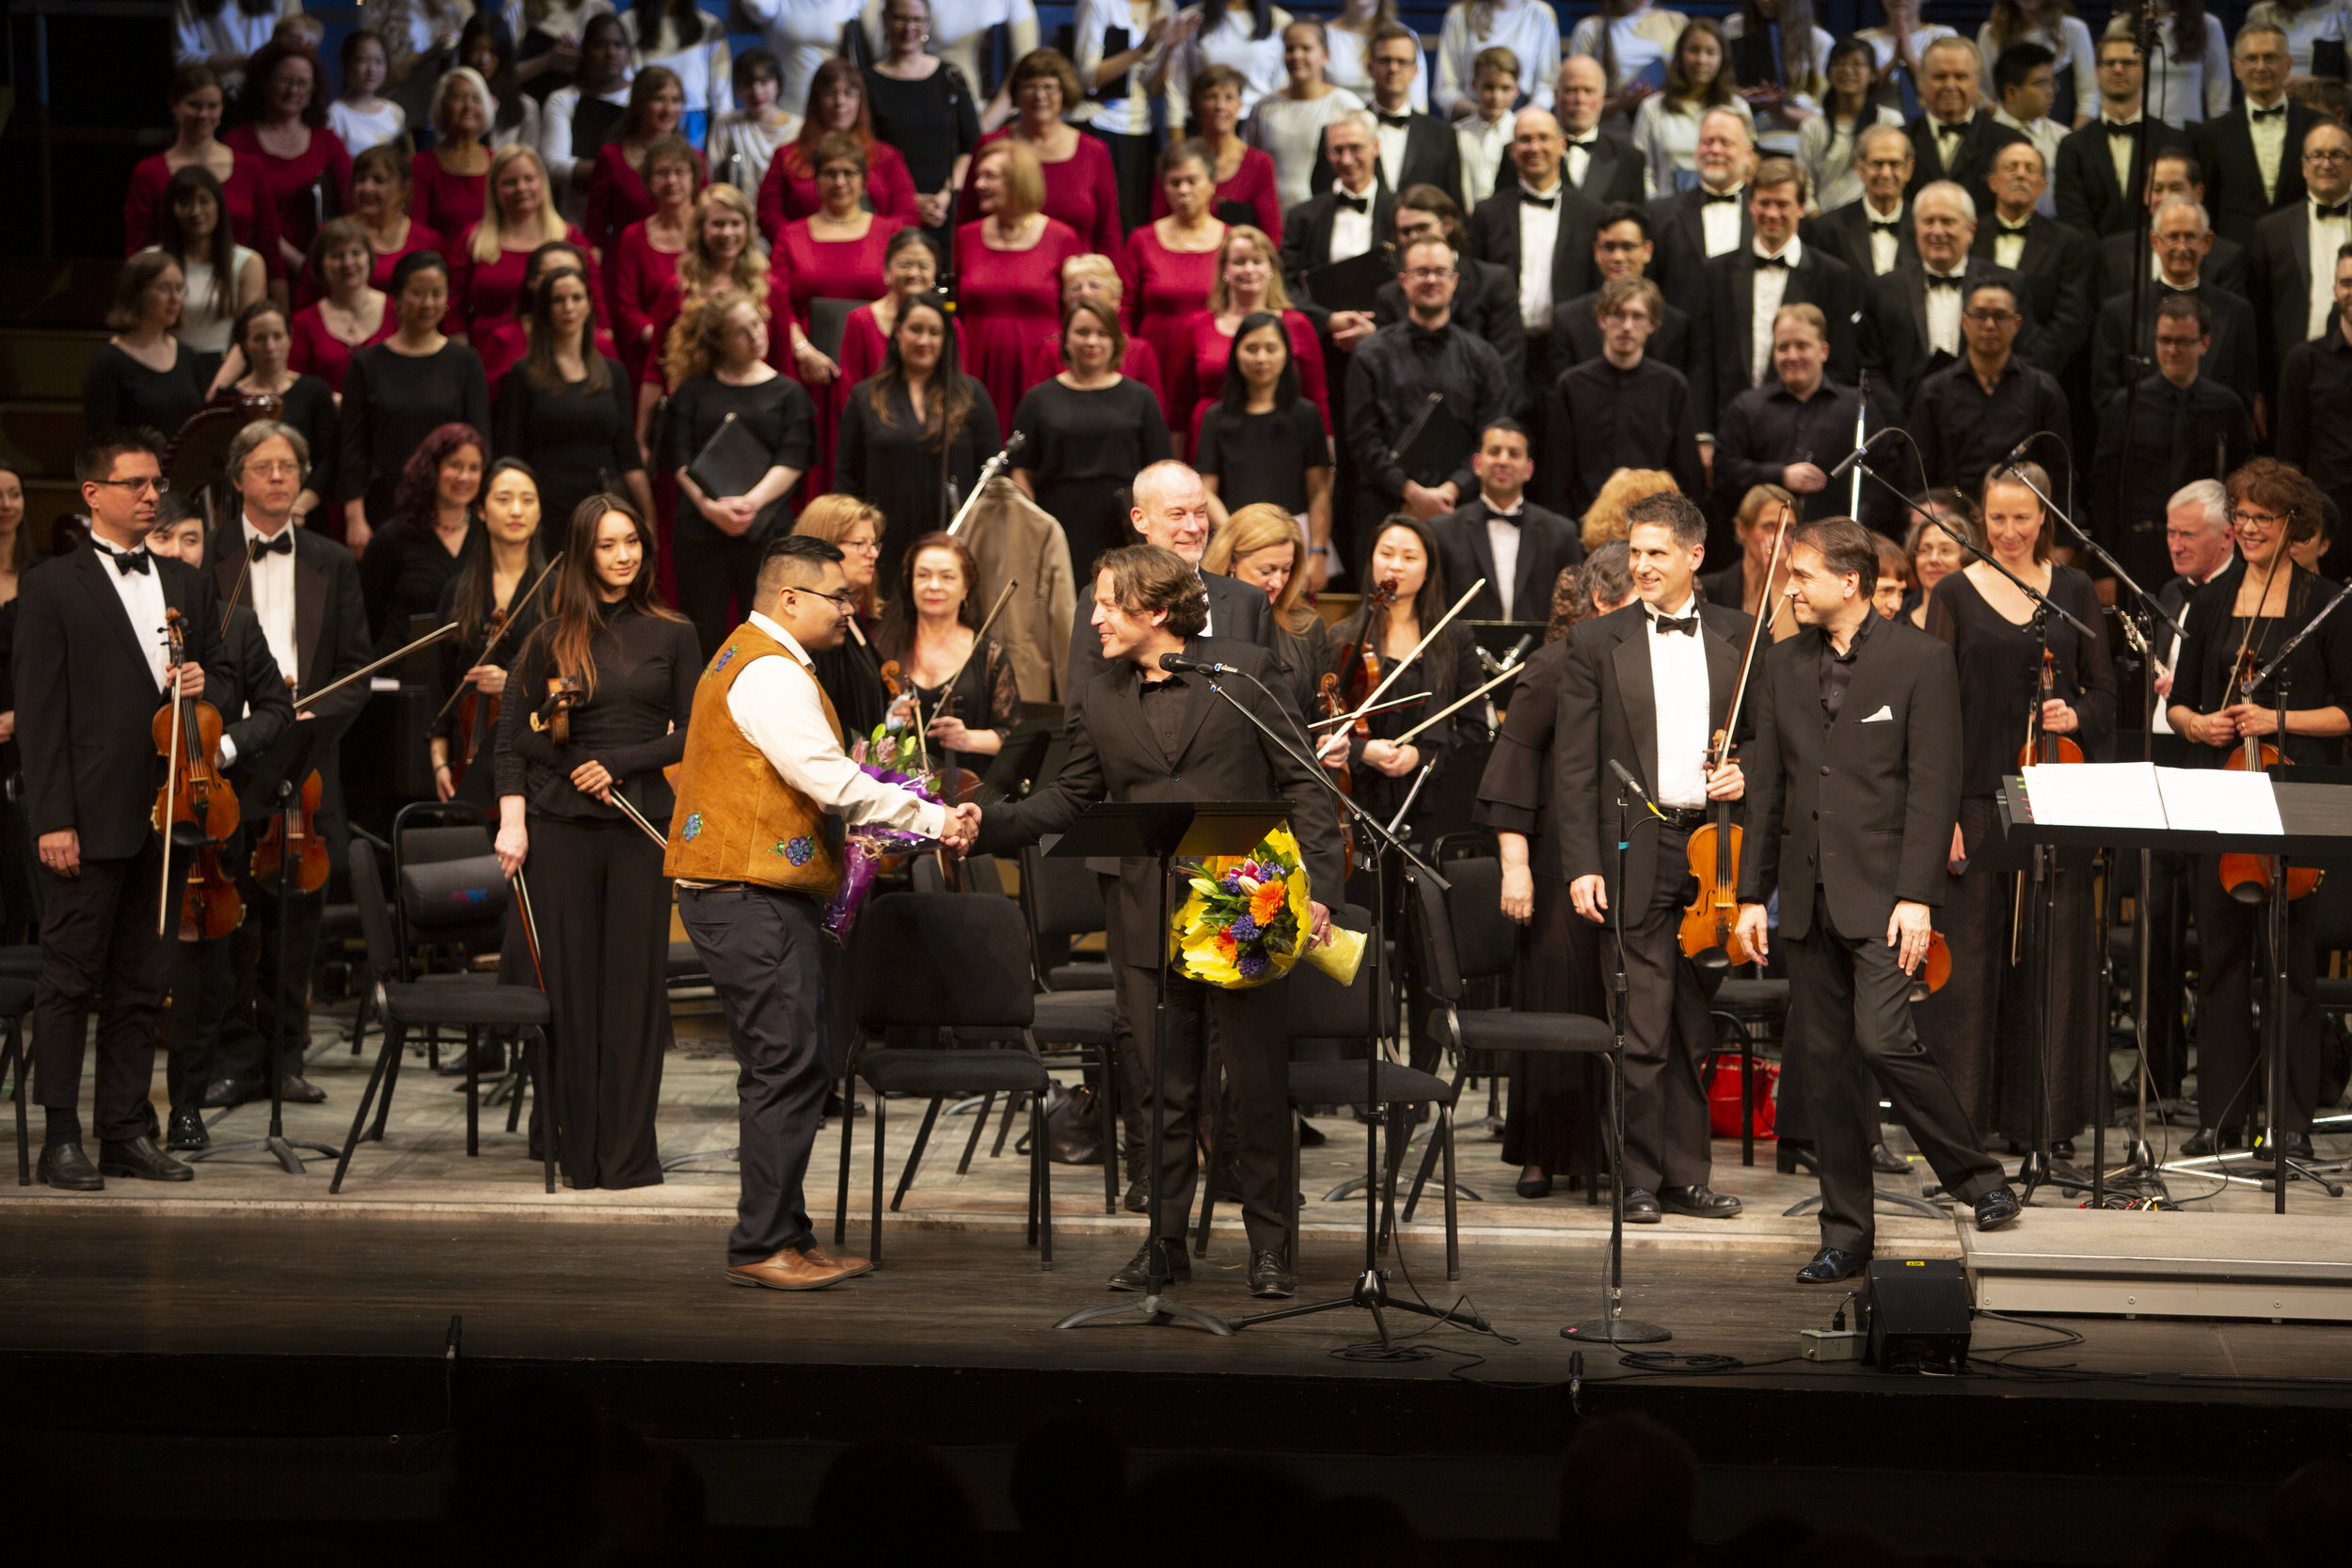  May 3 2019 - Thanking Narrator Mason Mantla (Tlicho) following the world premiere of the full evening oratorio  The River Of Light  by Vancouver Opera and Vancouver Bach Choir.    